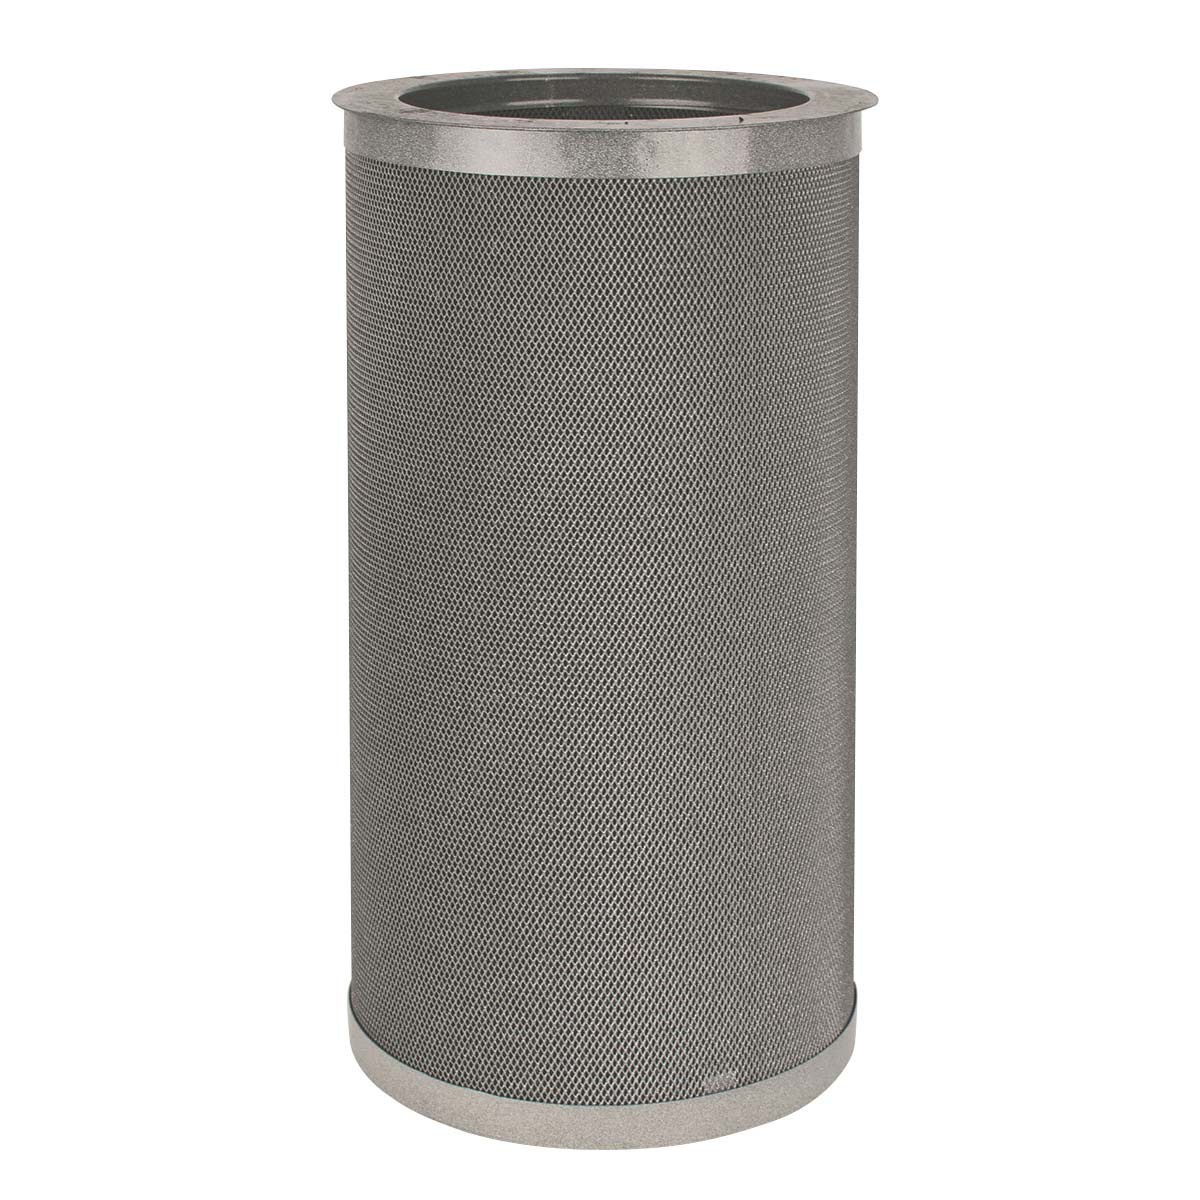 3rd Stage Carbon Canister Filter - Reduce Odor and VOC - NorAir 800